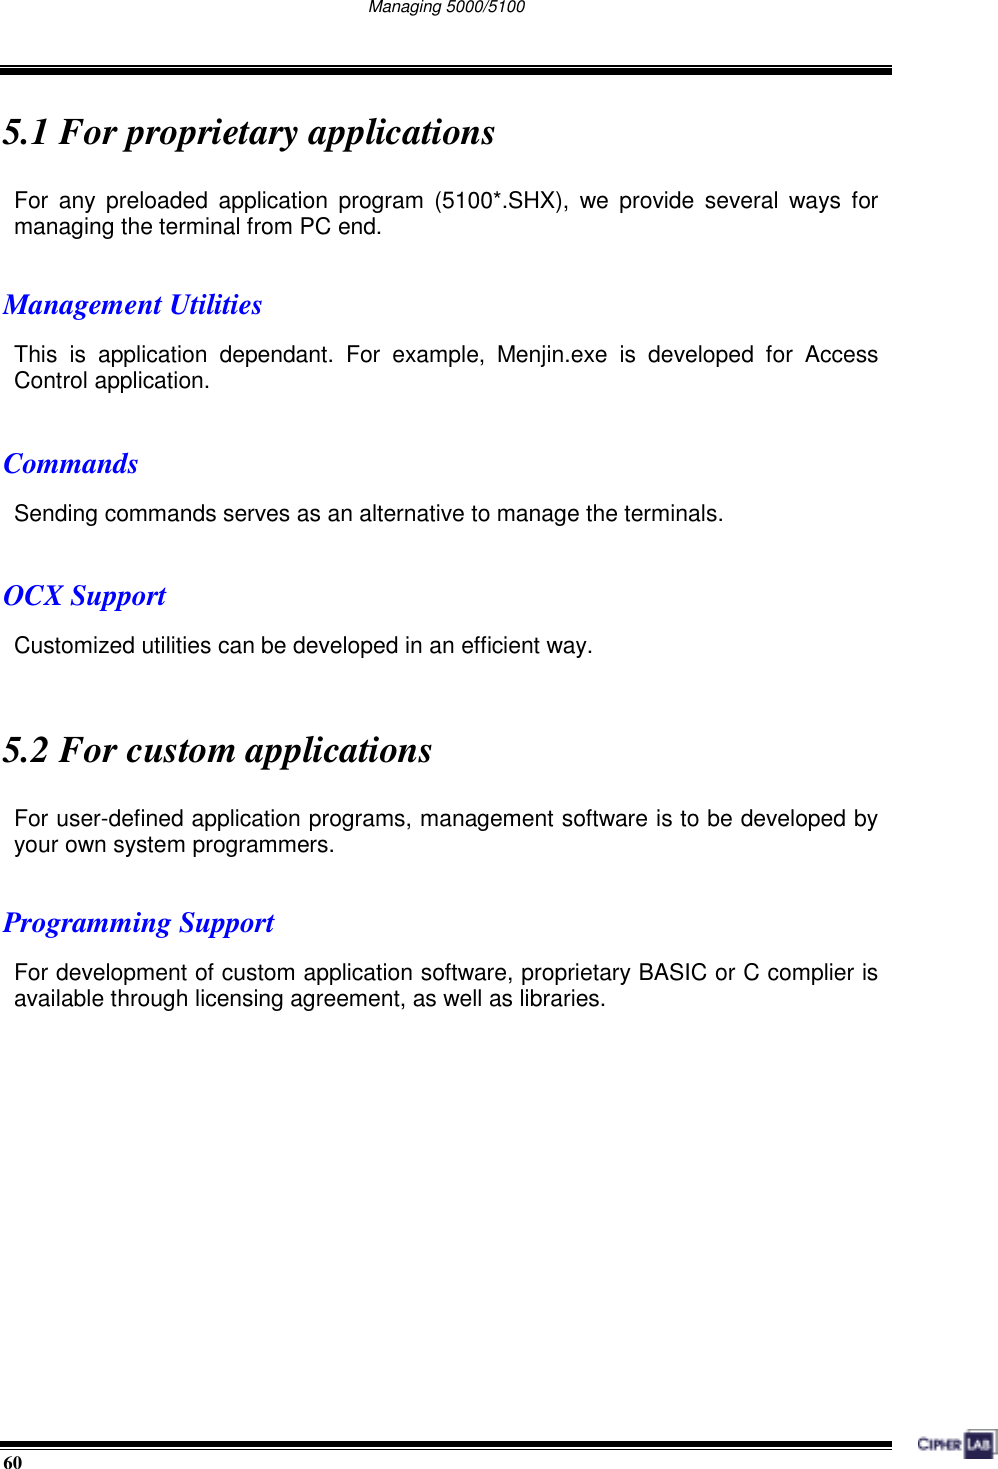  60                                                                                   Managing 5000/5100      5.1 For proprietary applications For any preloaded application program (5100*.SHX), we provide several ways for managing the terminal from PC end.  Management Utilities This is application dependant. For example, Menjin.exe is developed for Access Control application.  Commands Sending commands serves as an alternative to manage the terminals.  OCX Support Customized utilities can be developed in an efficient way.     5.2 For custom applications For user-defined application programs, management software is to be developed by your own system programmers.  Programming Support For development of custom application software, proprietary BASIC or C complier is available through licensing agreement, as well as libraries.      